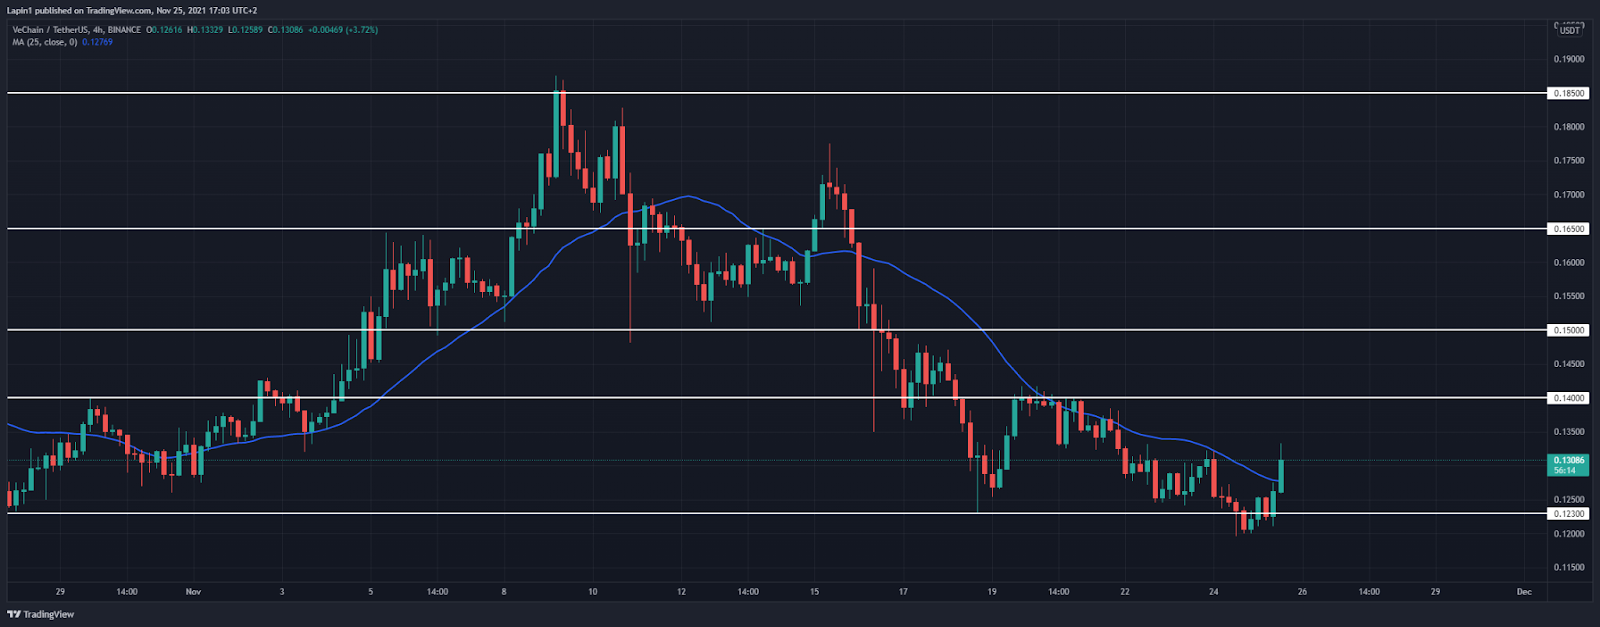 VeChain Price Analysis: VET spikes above $0.13, prepares for another push lower?